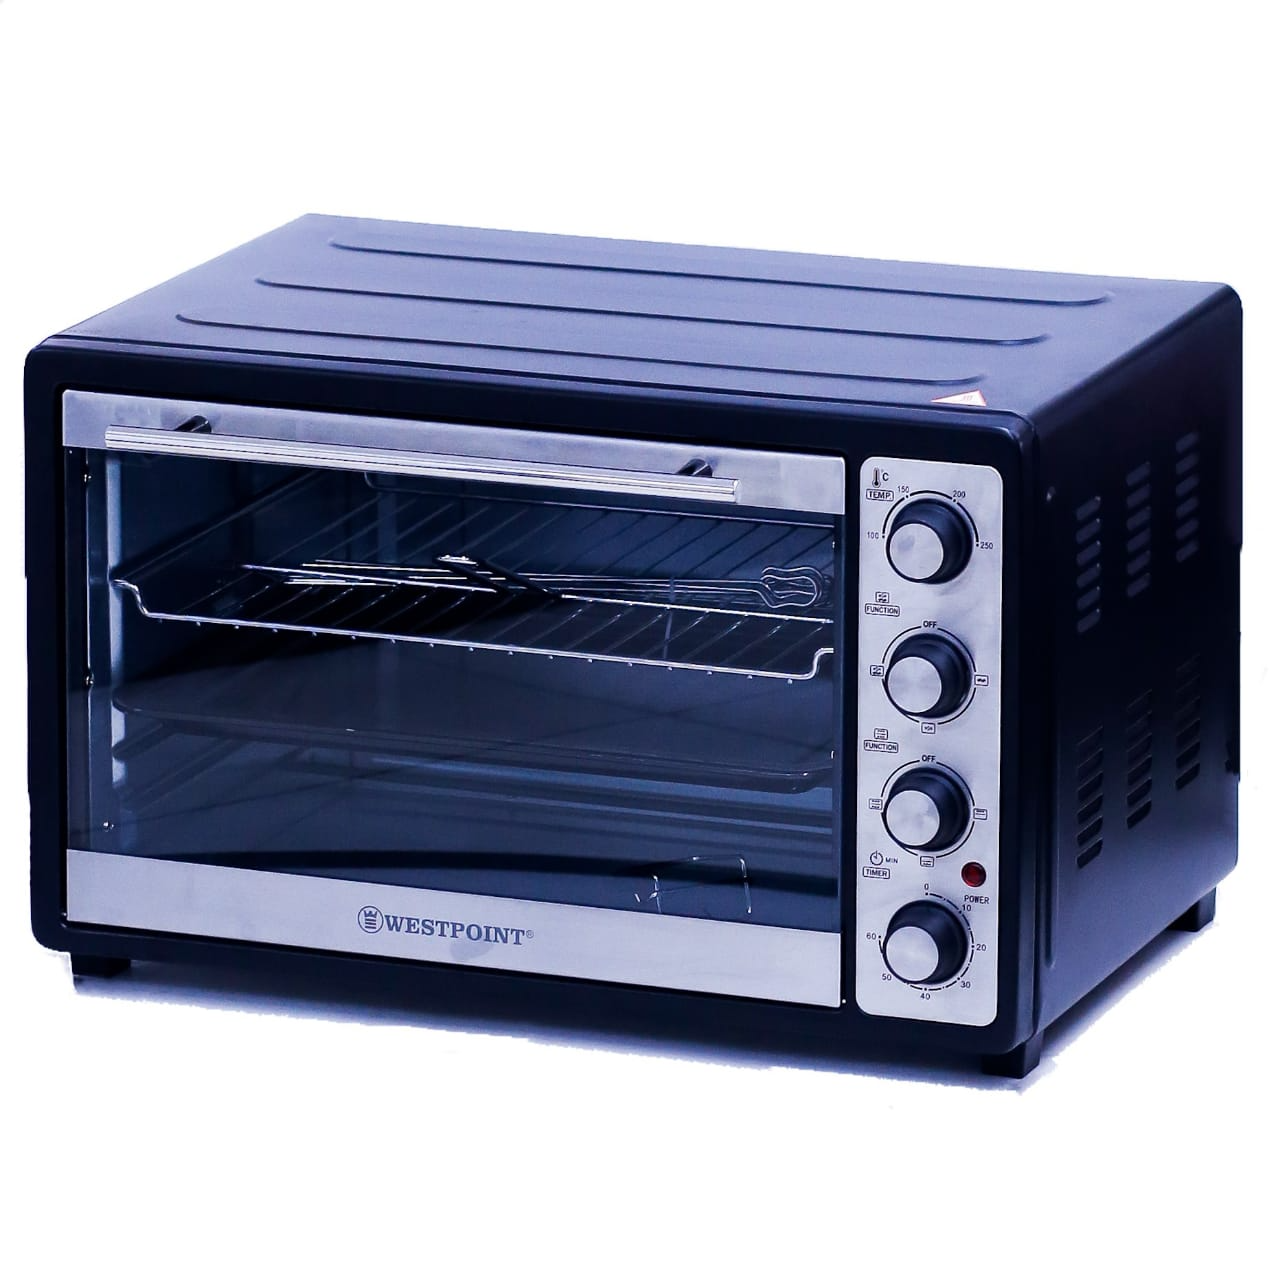 WEST POINT ELECTRIC OVEN 4500